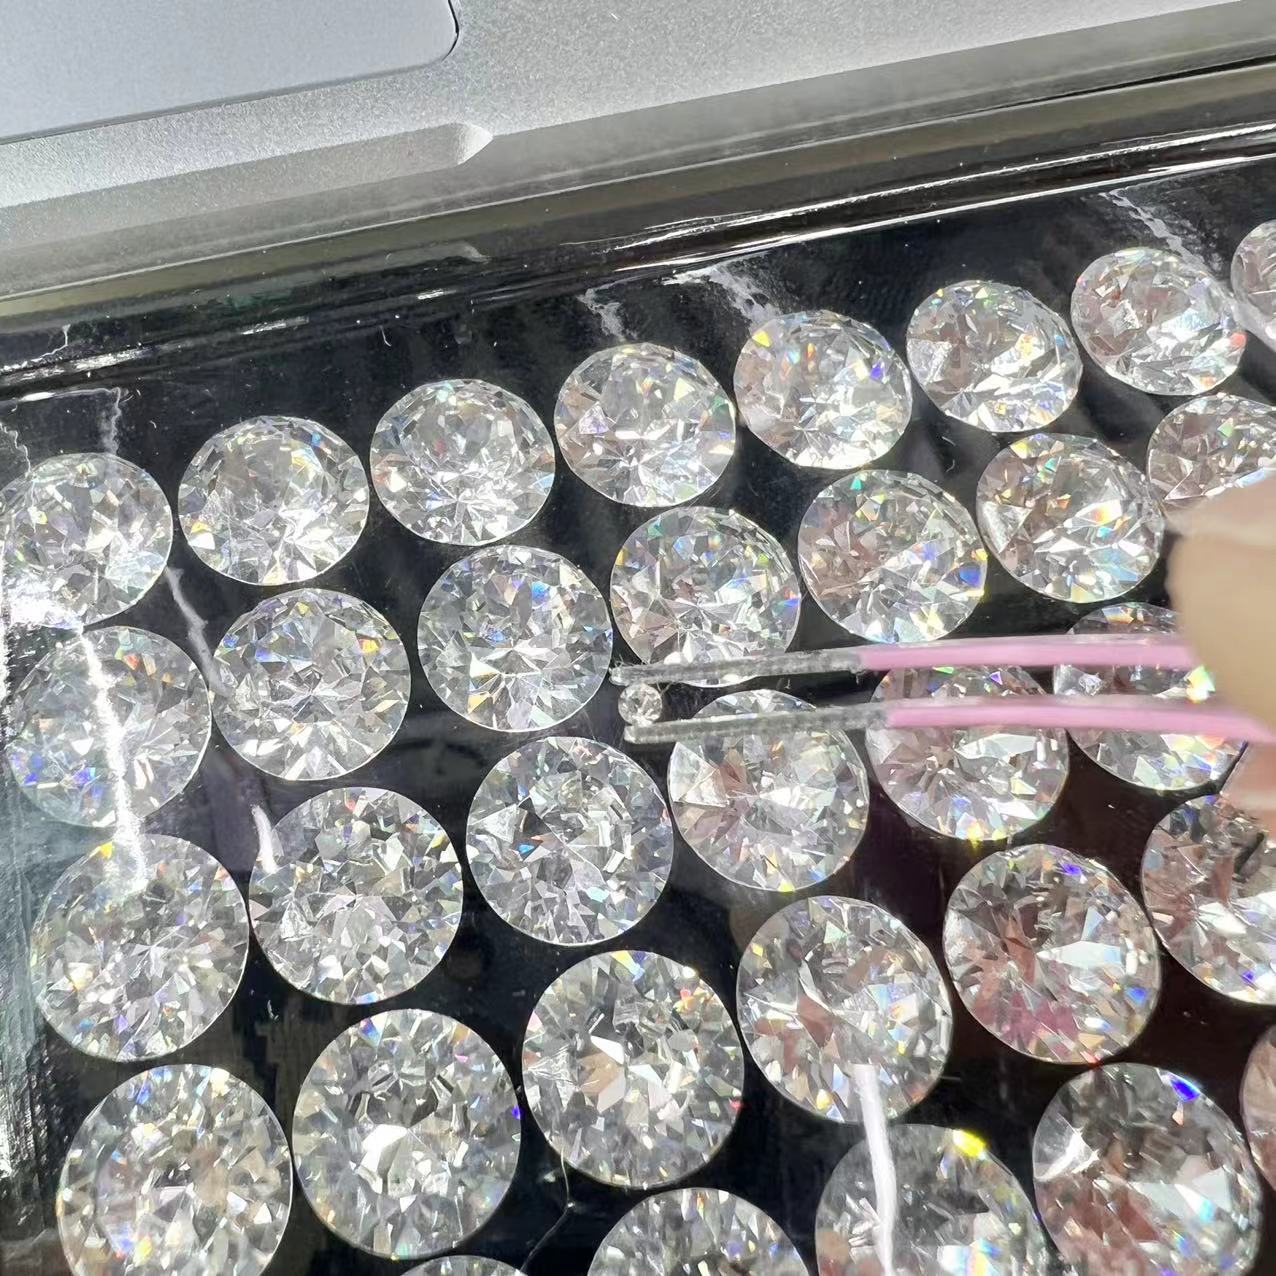 Imitation Shijia 33 Section Highlight High Flash White round Pointed Bottom Manicure Jewelry Seam Filling Diamond Nail Shop Essential